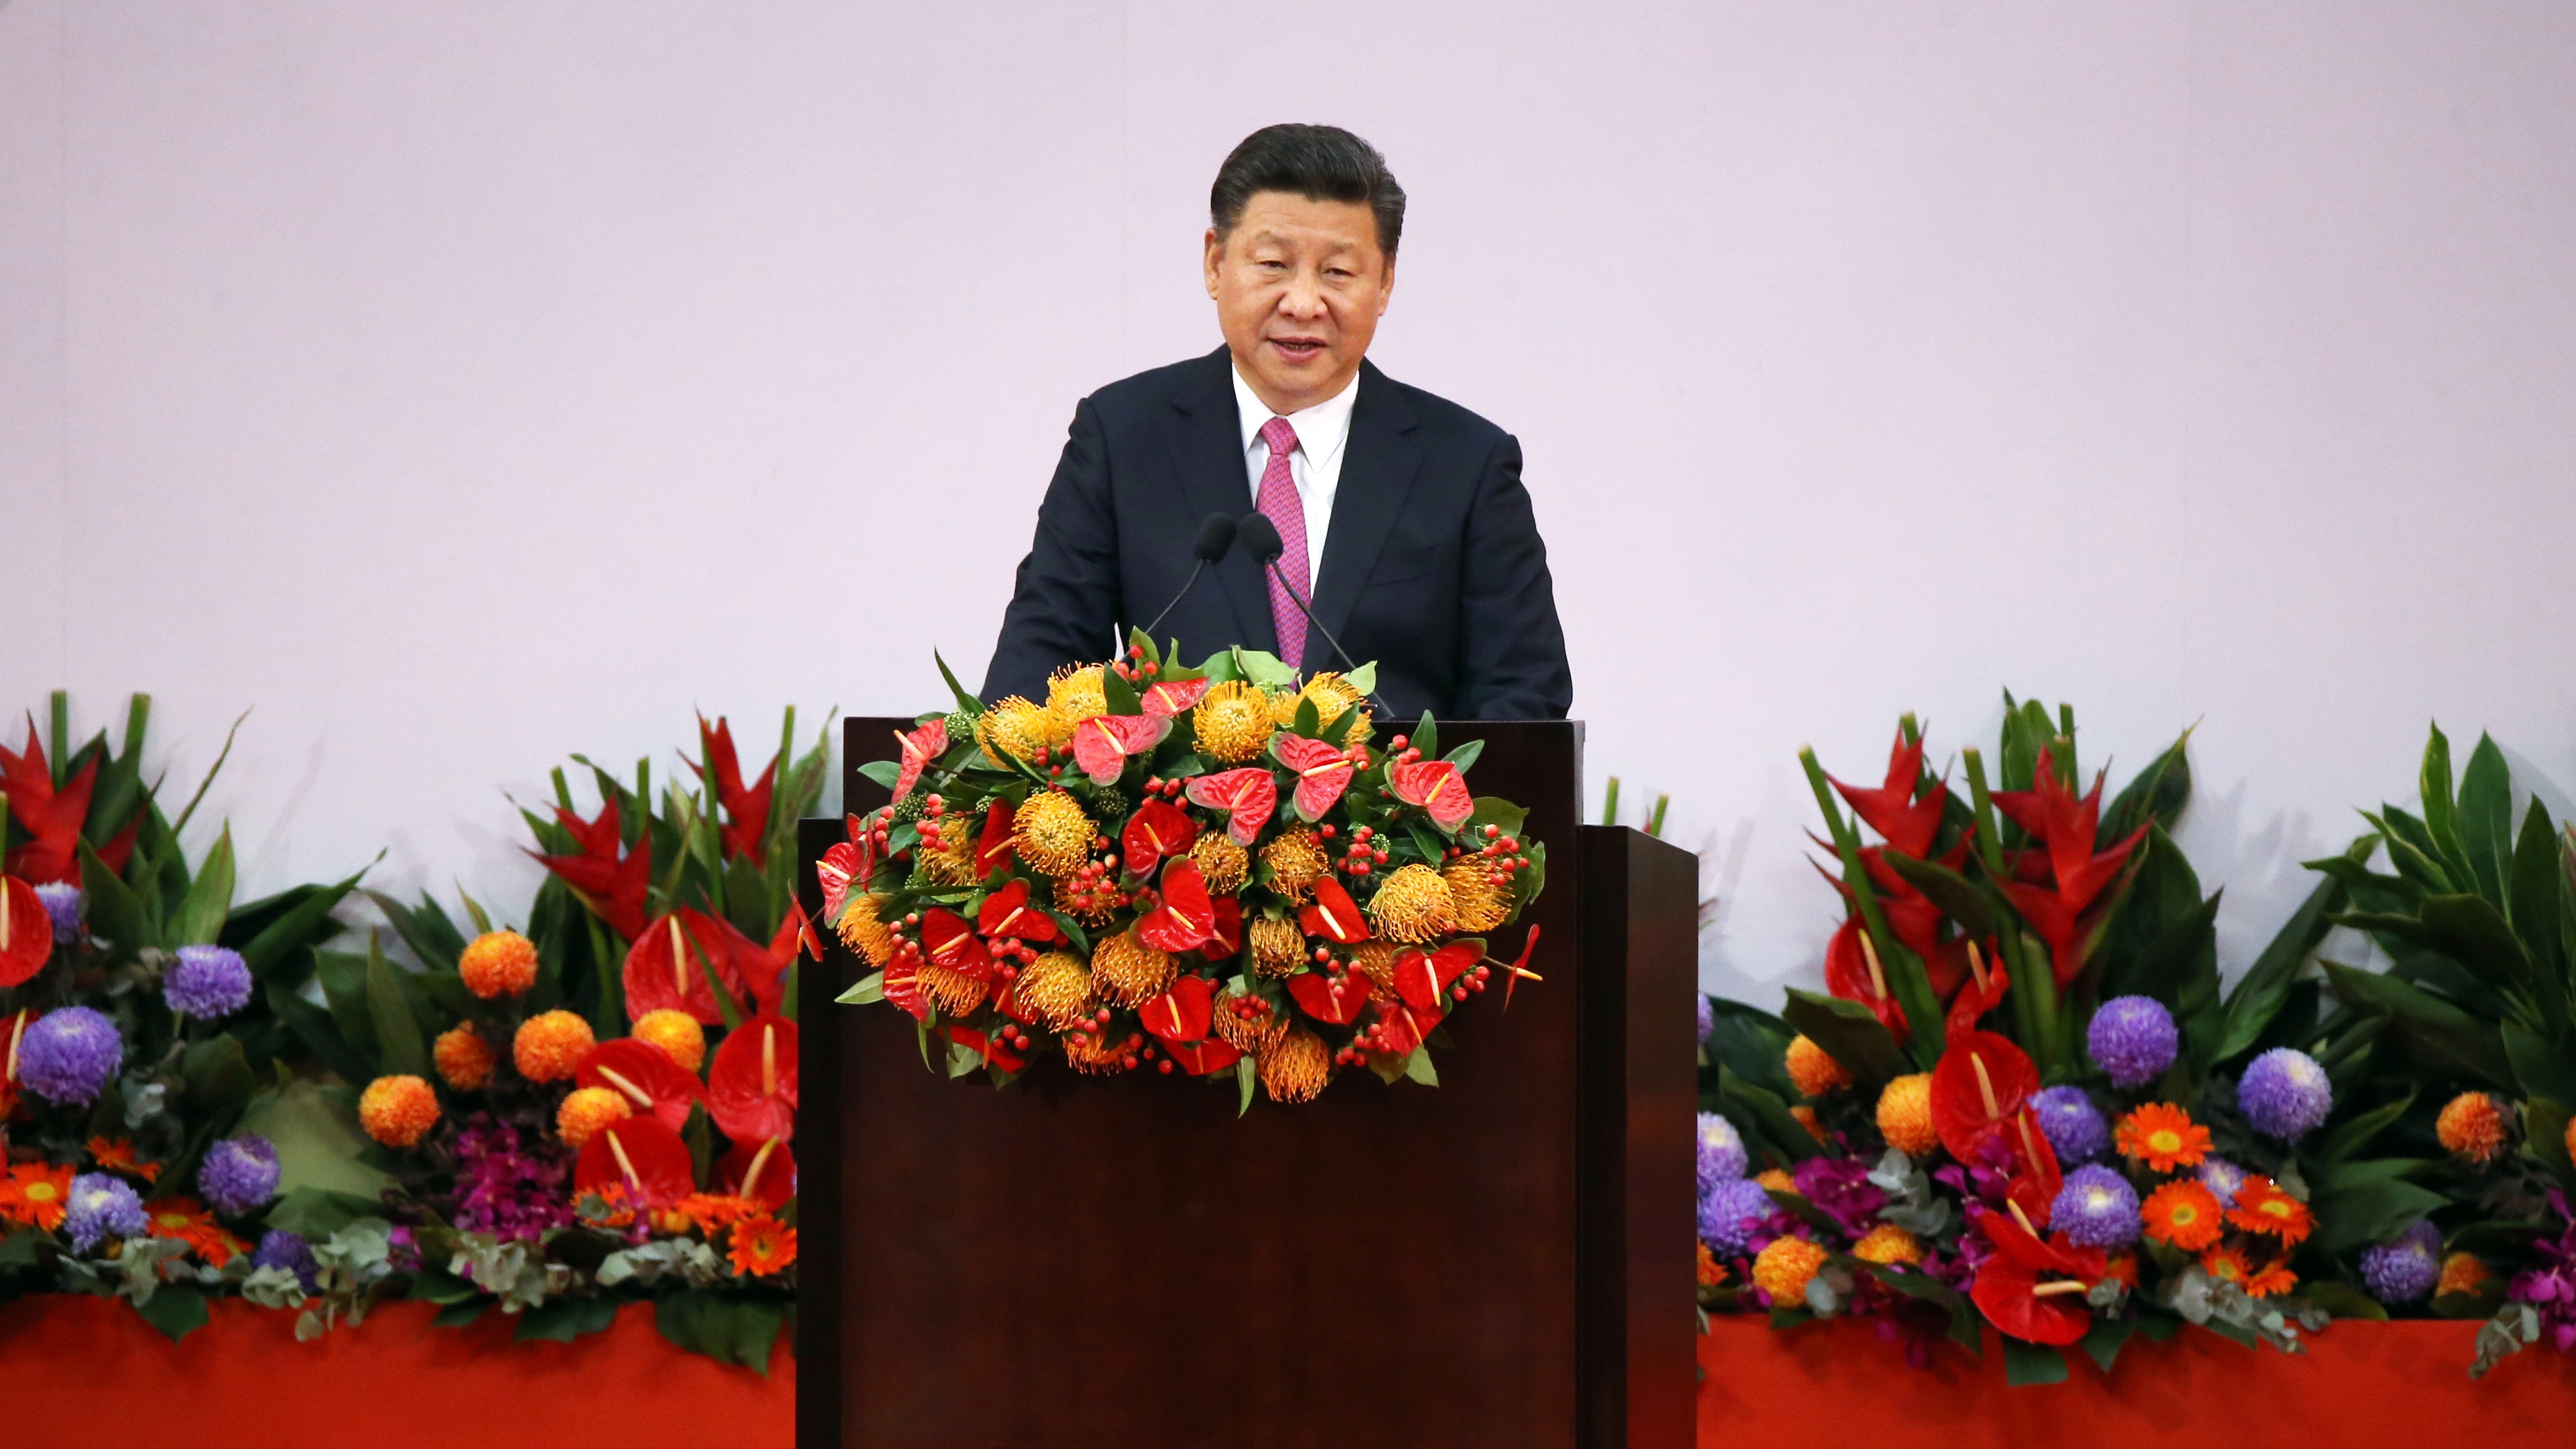 Xi Jinping addressed a crowd at the convention centre in Wan Chai. Photo: Sam Tsang